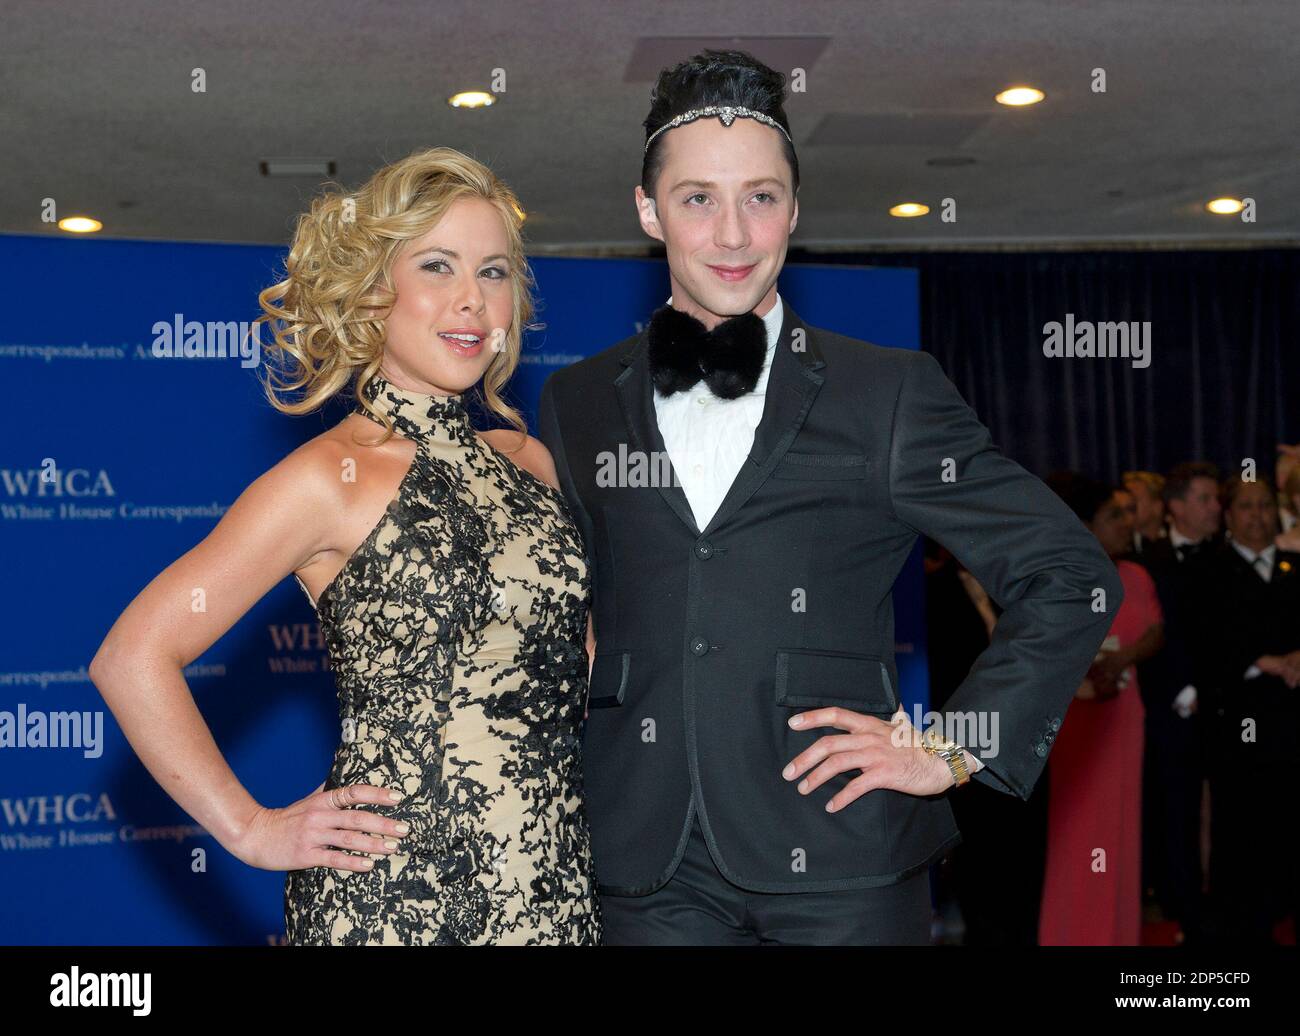 Tara Lipinski and Johnny Weir arrive for the 2015 White House Correspondents Association Annual Dinner at the Washington Hilton Hotel in Washington, DC, USA, on Saturday April 25, 2015. Photo by Ron Sachs/CNP/ABACAPRESS.COM Stock Photo